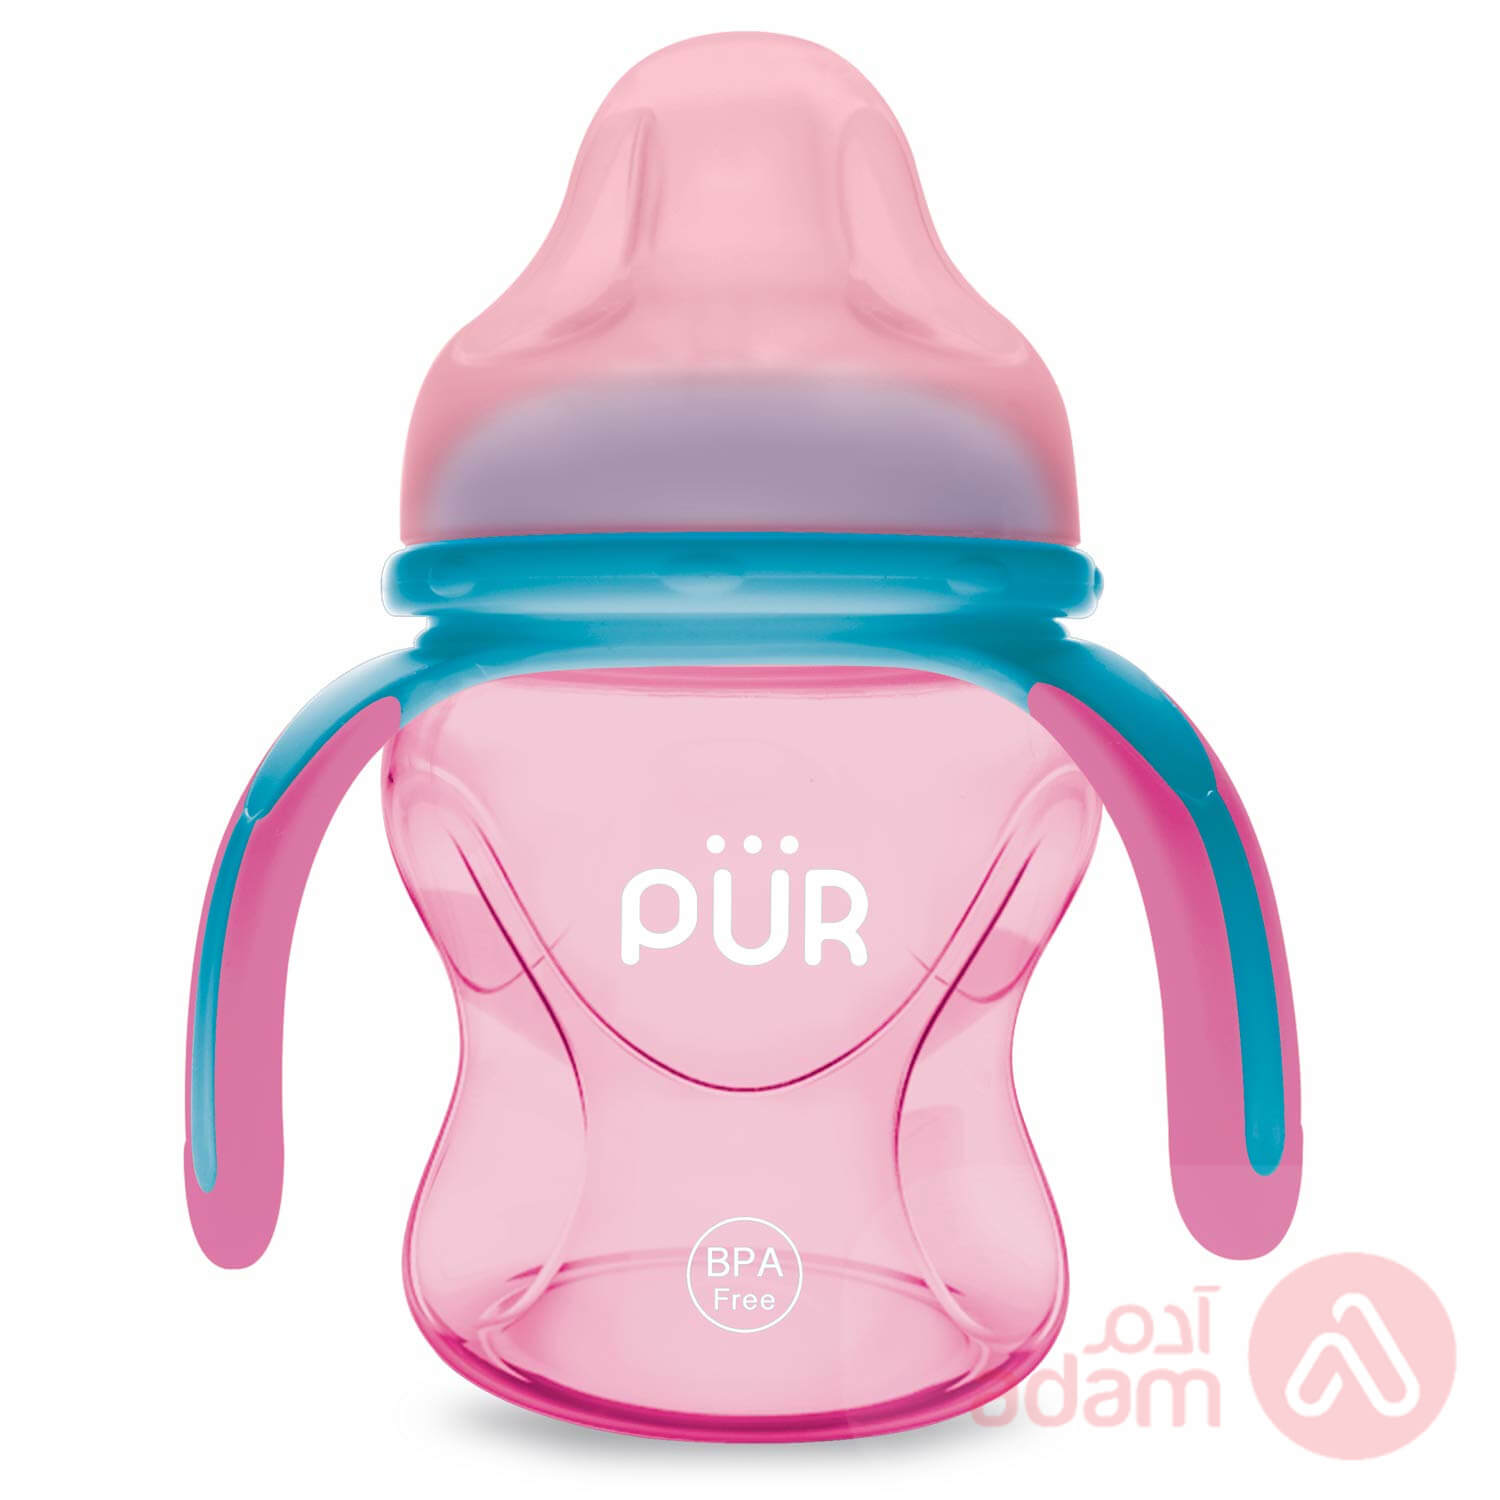 Pur Drinking Cup